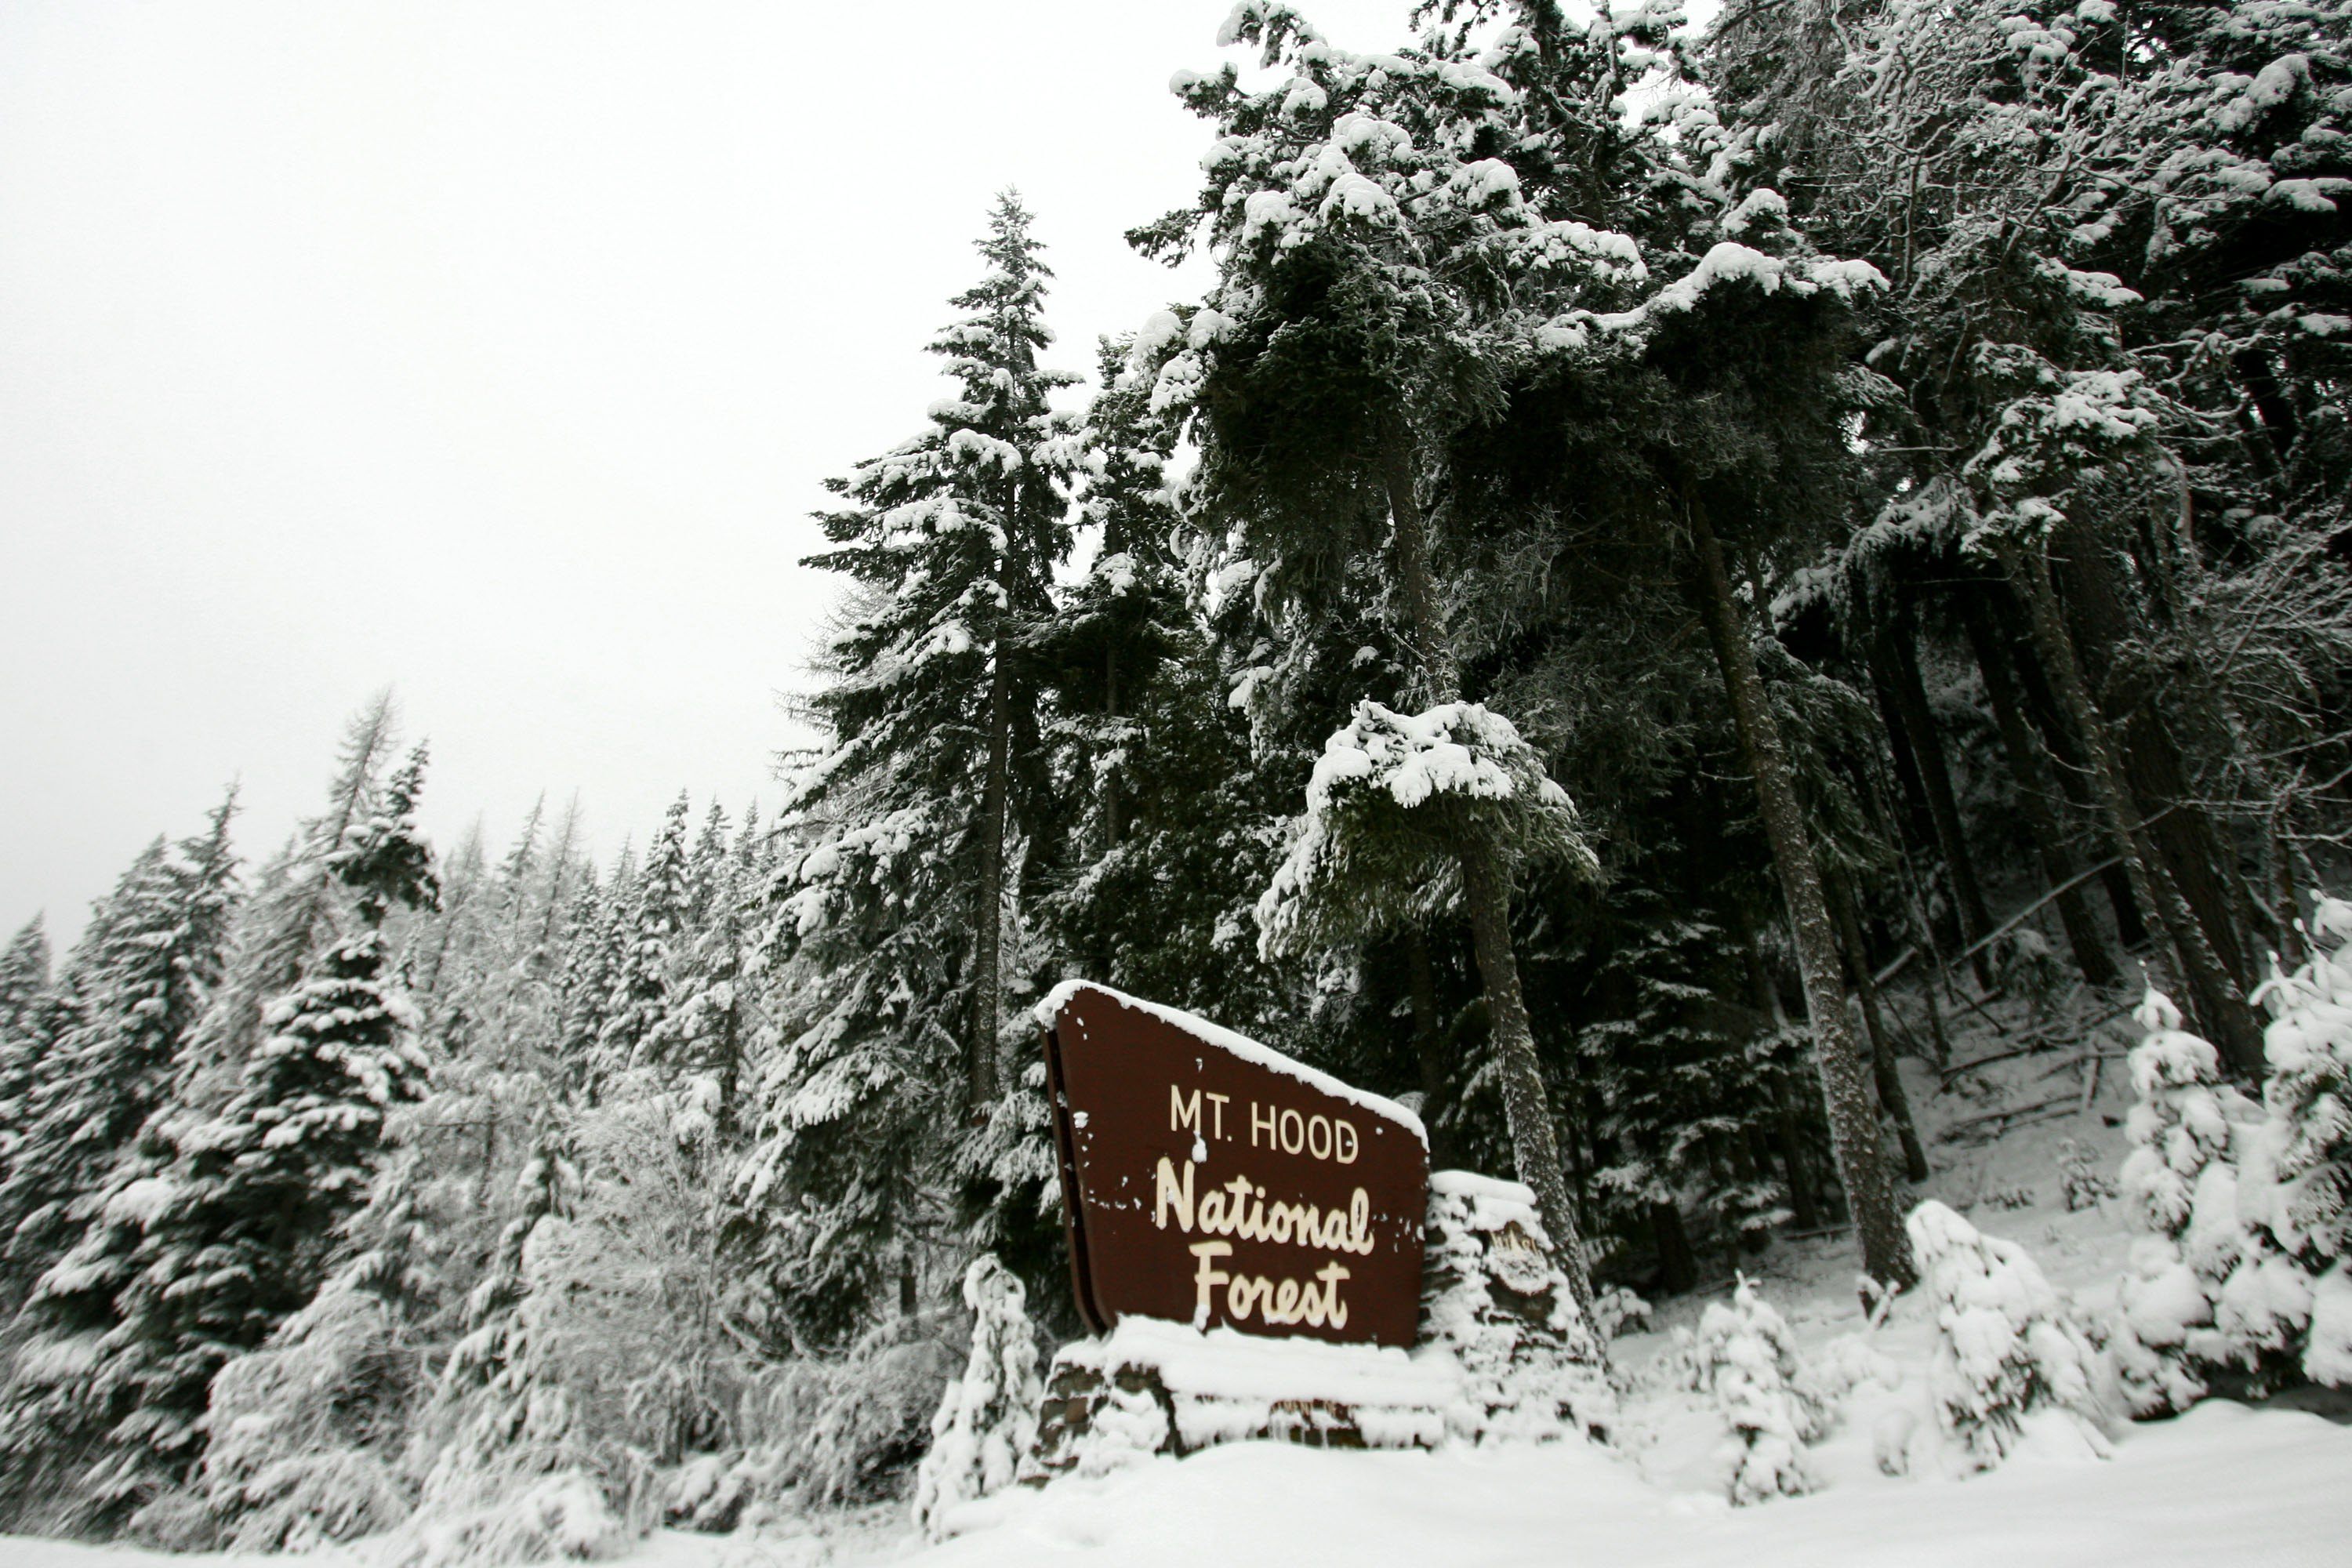 A sign for Mt. Hood National forest